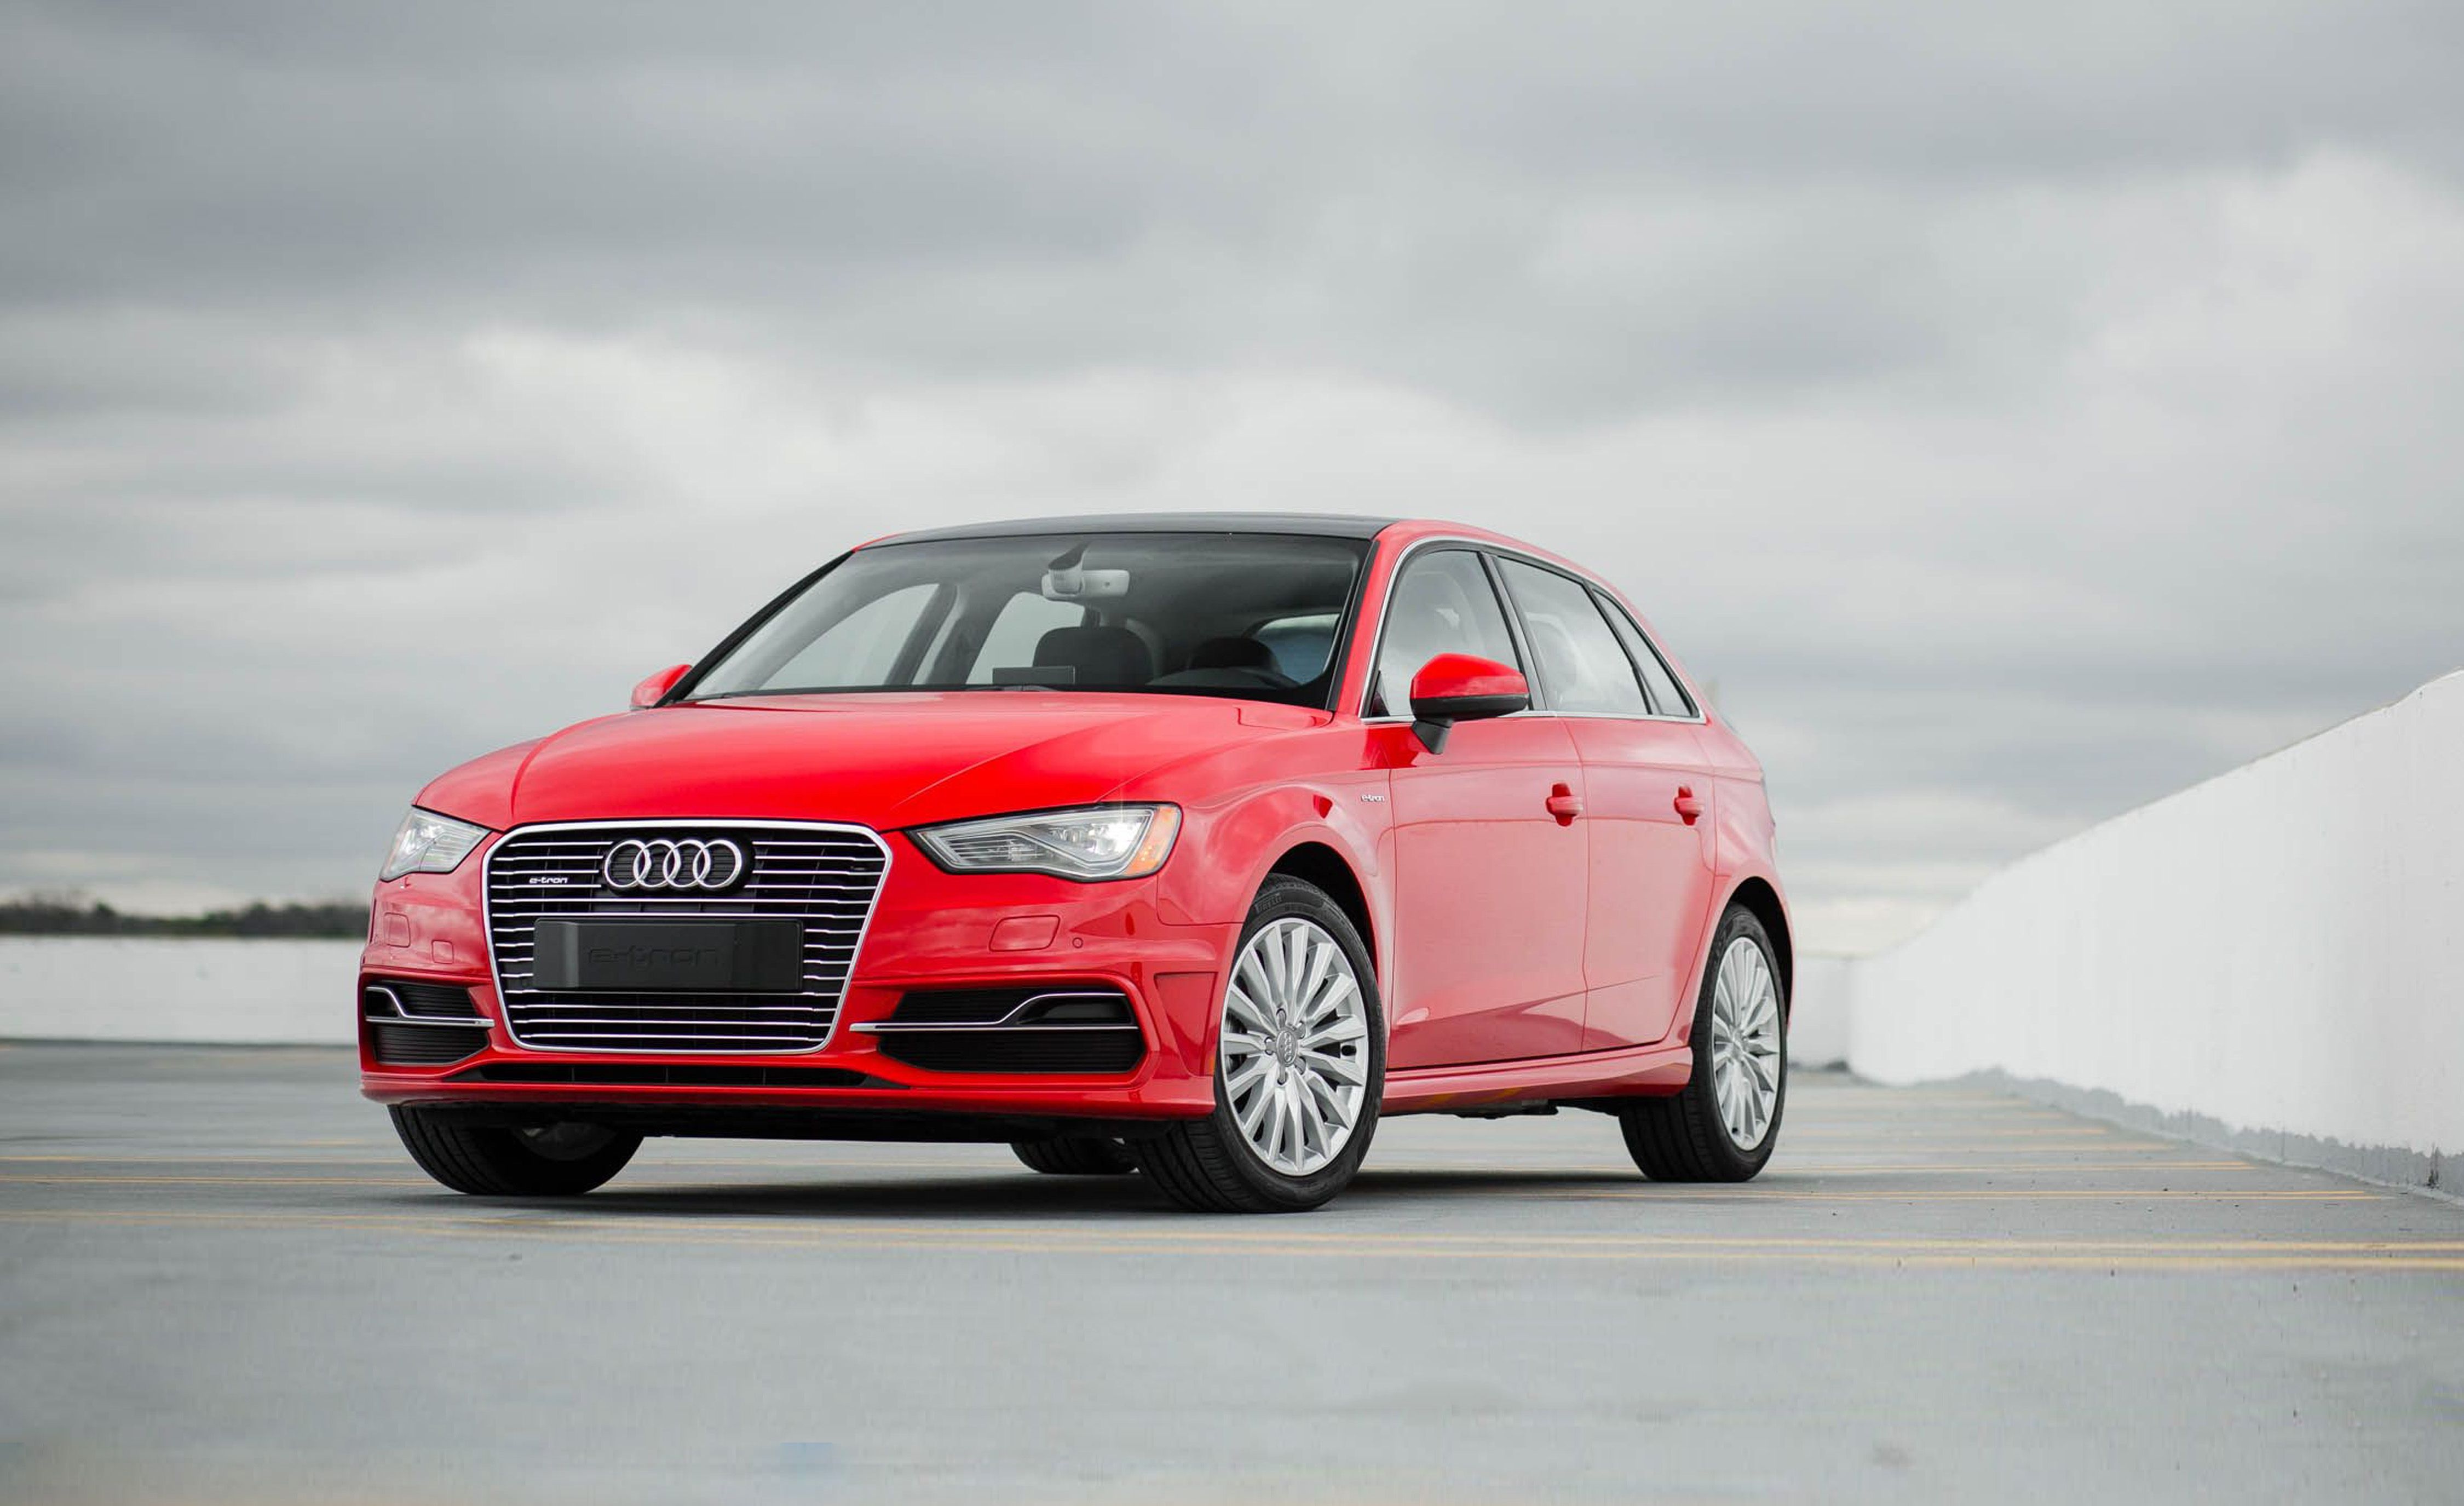 Netto onderpand Luipaard 2018 Audi A3 Sportback e-tron Review, Pricing, and Specs